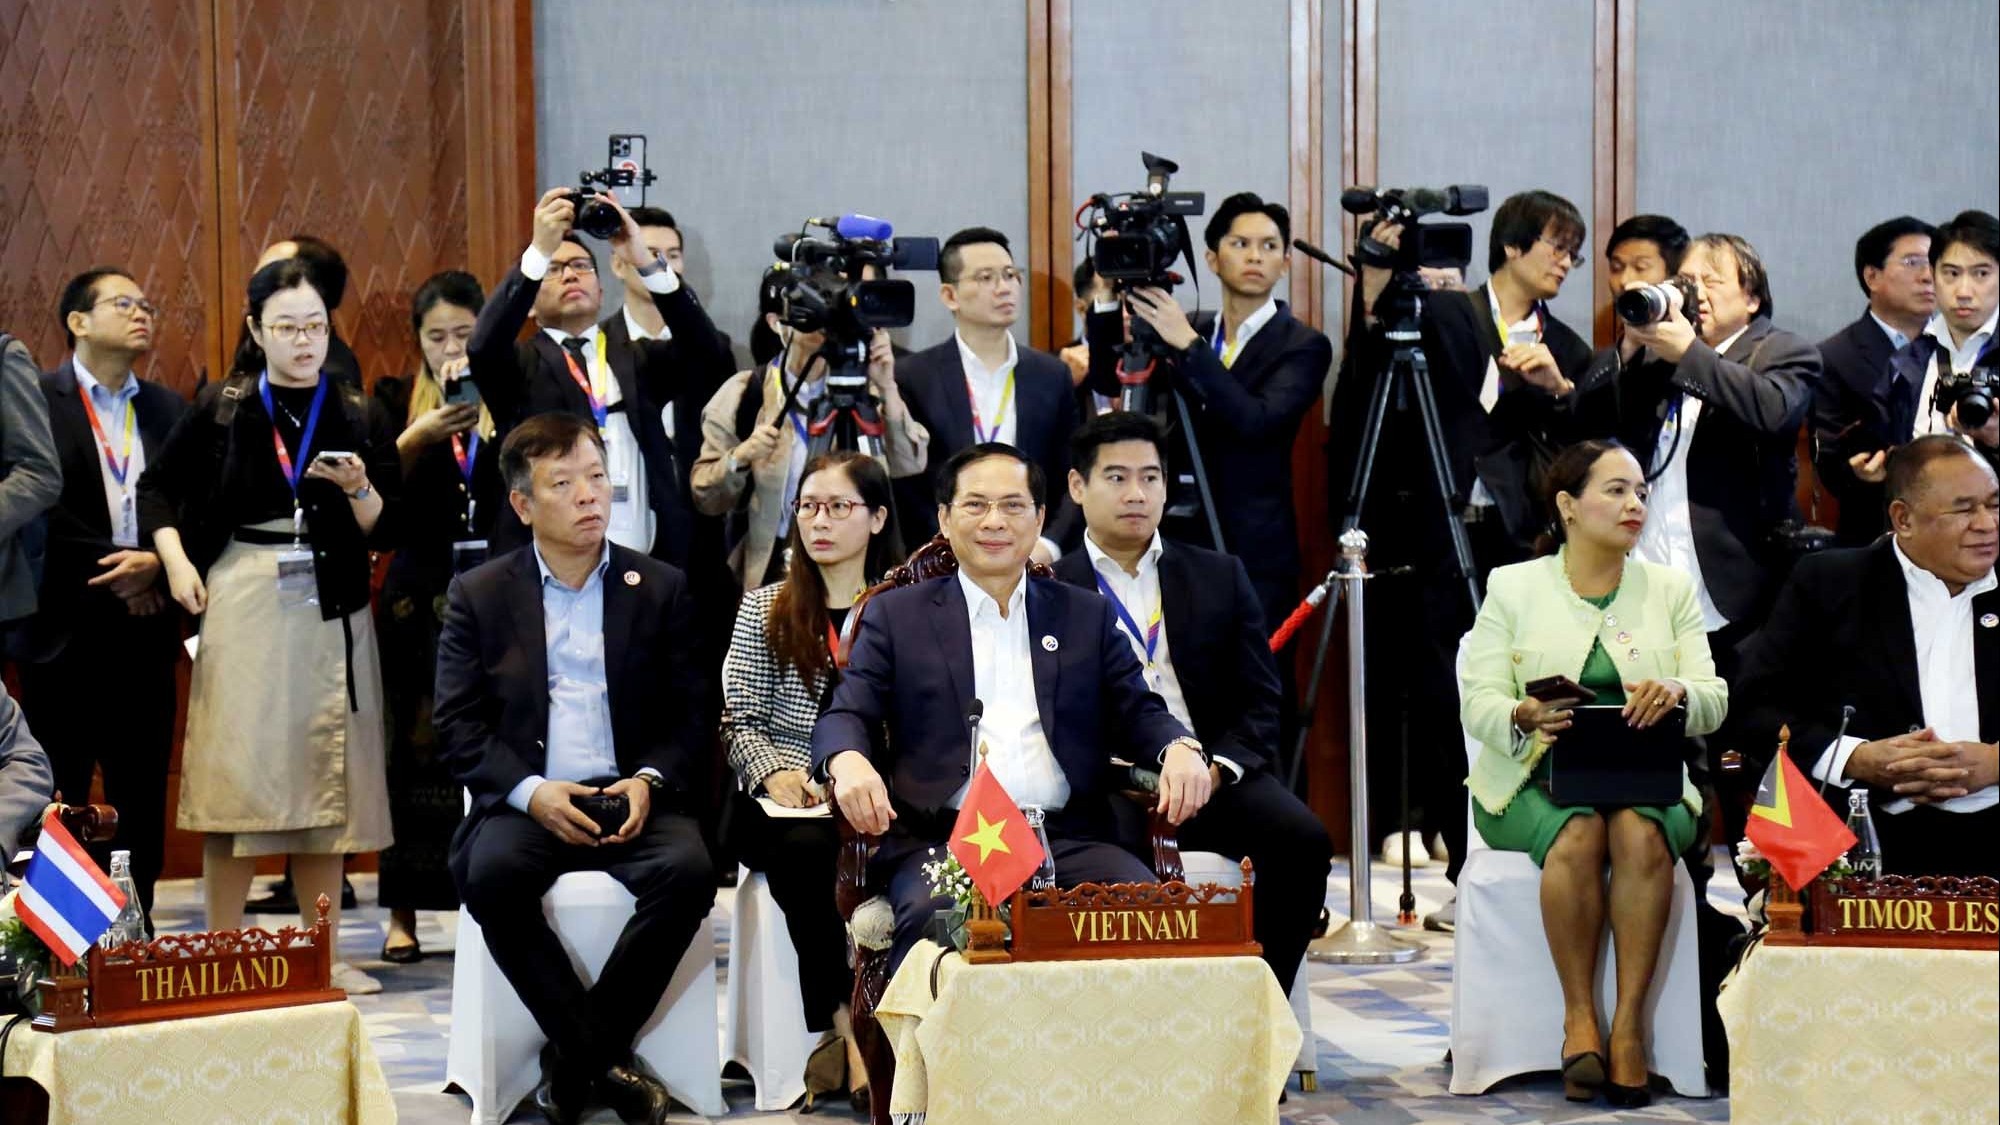 Vietnam proposes ASEAN strengthen connectivity: Foreign Minister at AMM' Retreat